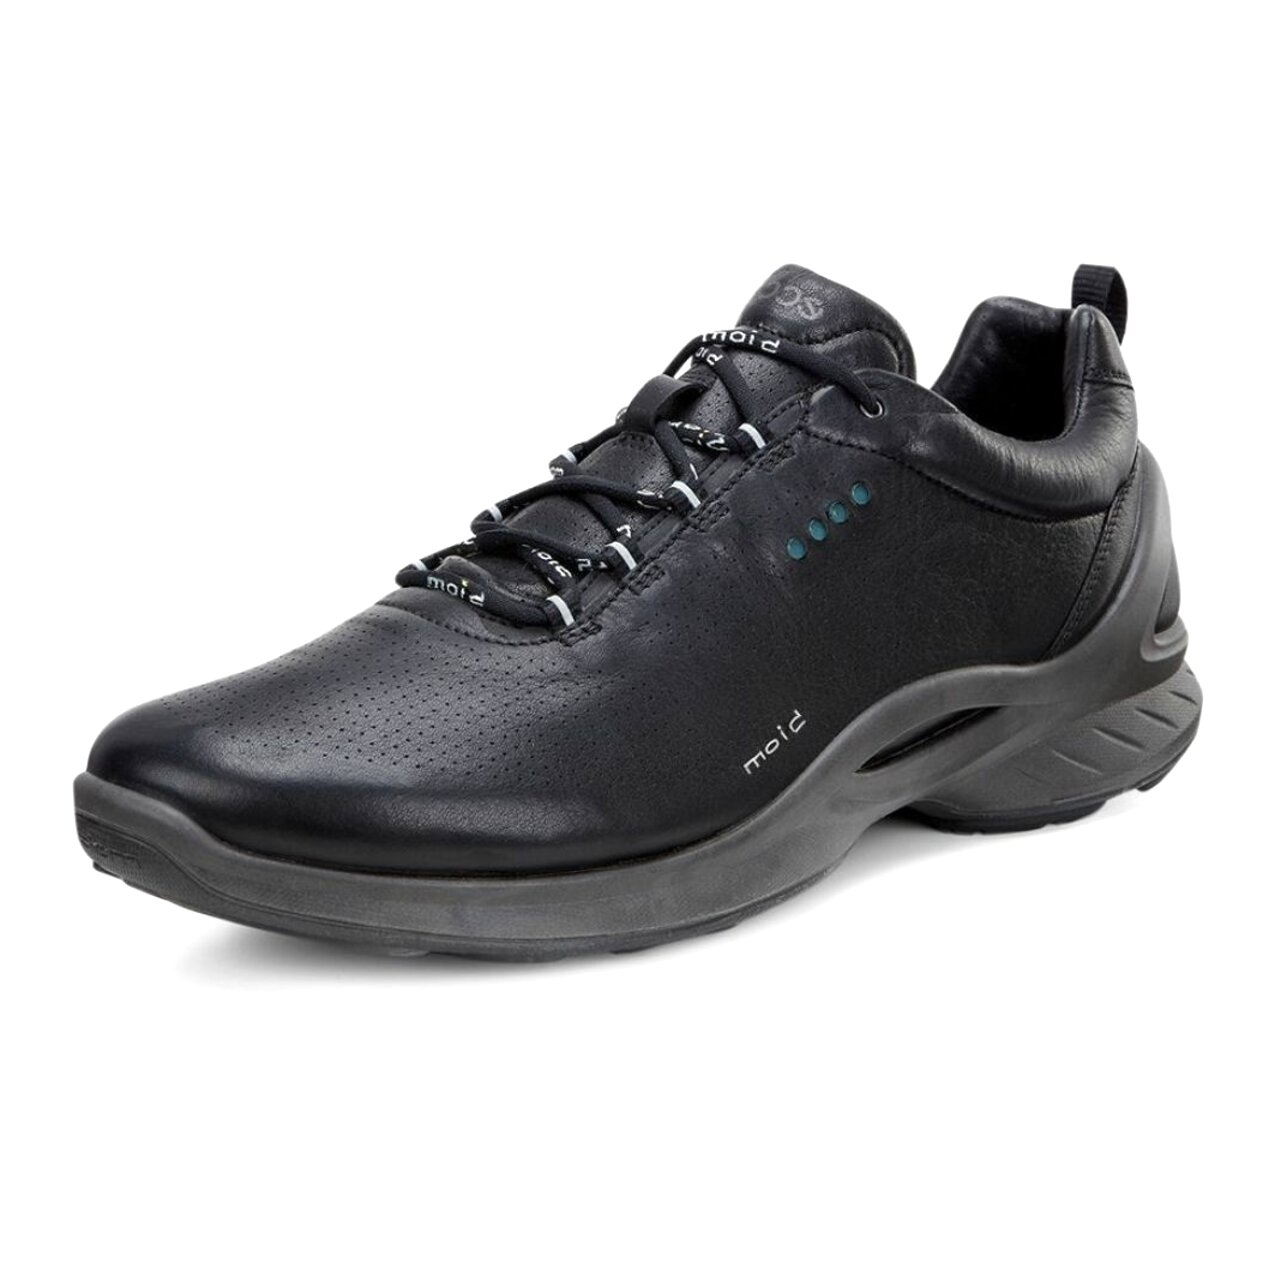 Ecco Walking Shoes Womens for sale in UK | 57 used Ecco Walking Shoes ...